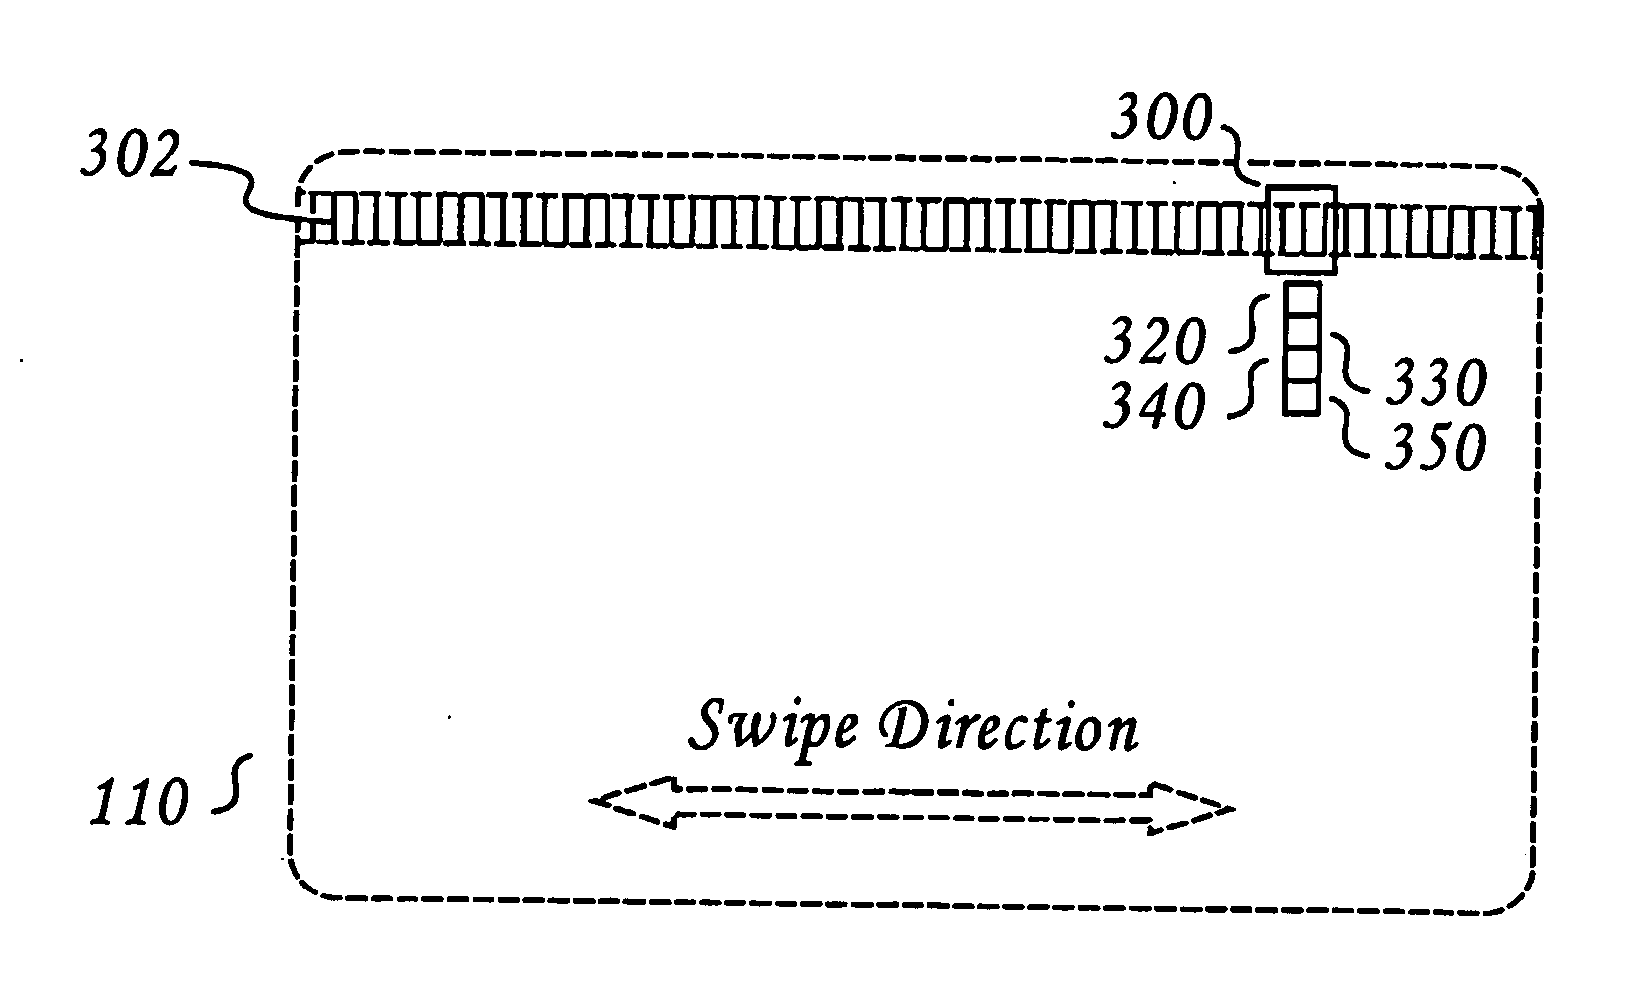 Method and system for data writing/reading onto/from and emulating a magnetic stripe